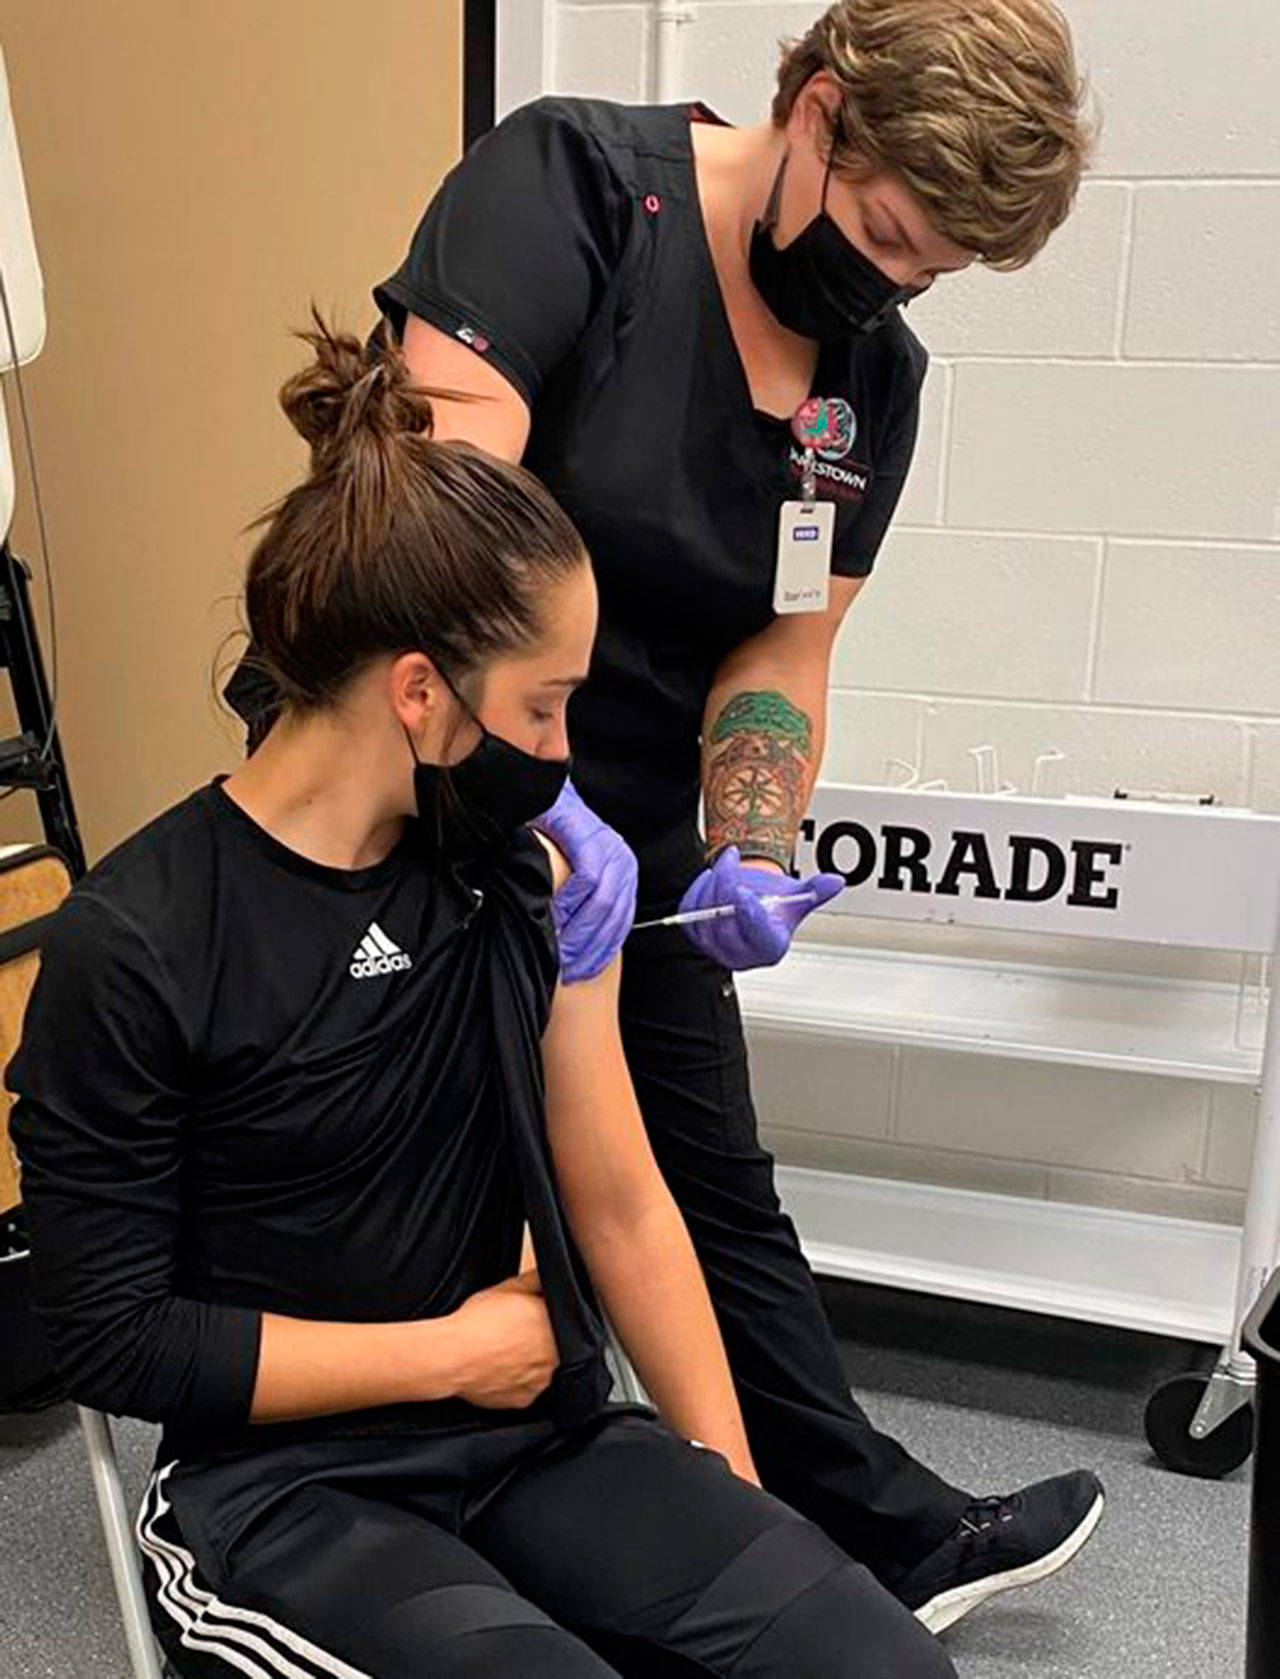 Kascia Muscutt, a soccer player and Associated Student Body president at Peninsula College, gets a COVID vaccination shot from a Jamestown Health Clinic staffer. (Photo courtesy of Peninsula College)